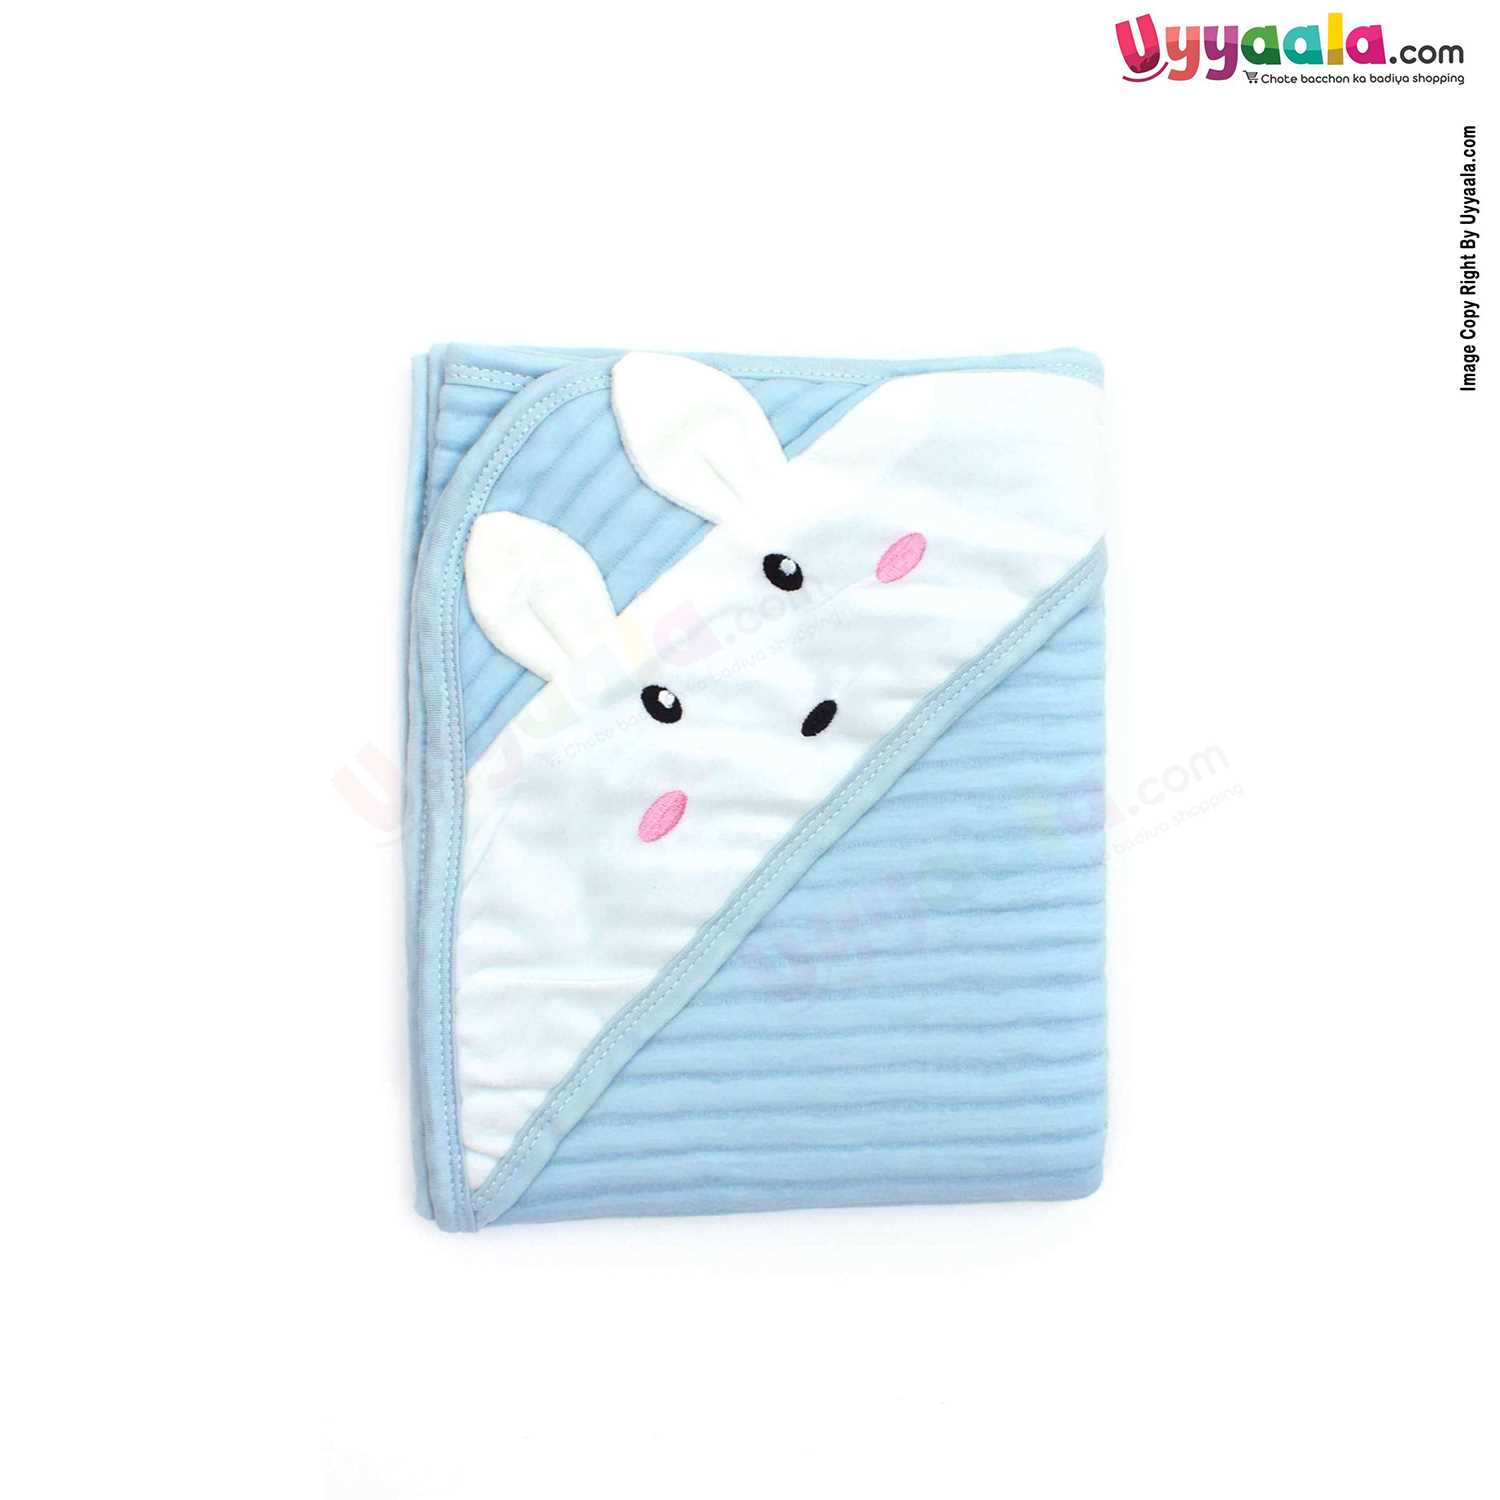 Thermal Hood Blanket Rabbit Character 0-24m Age,Blue